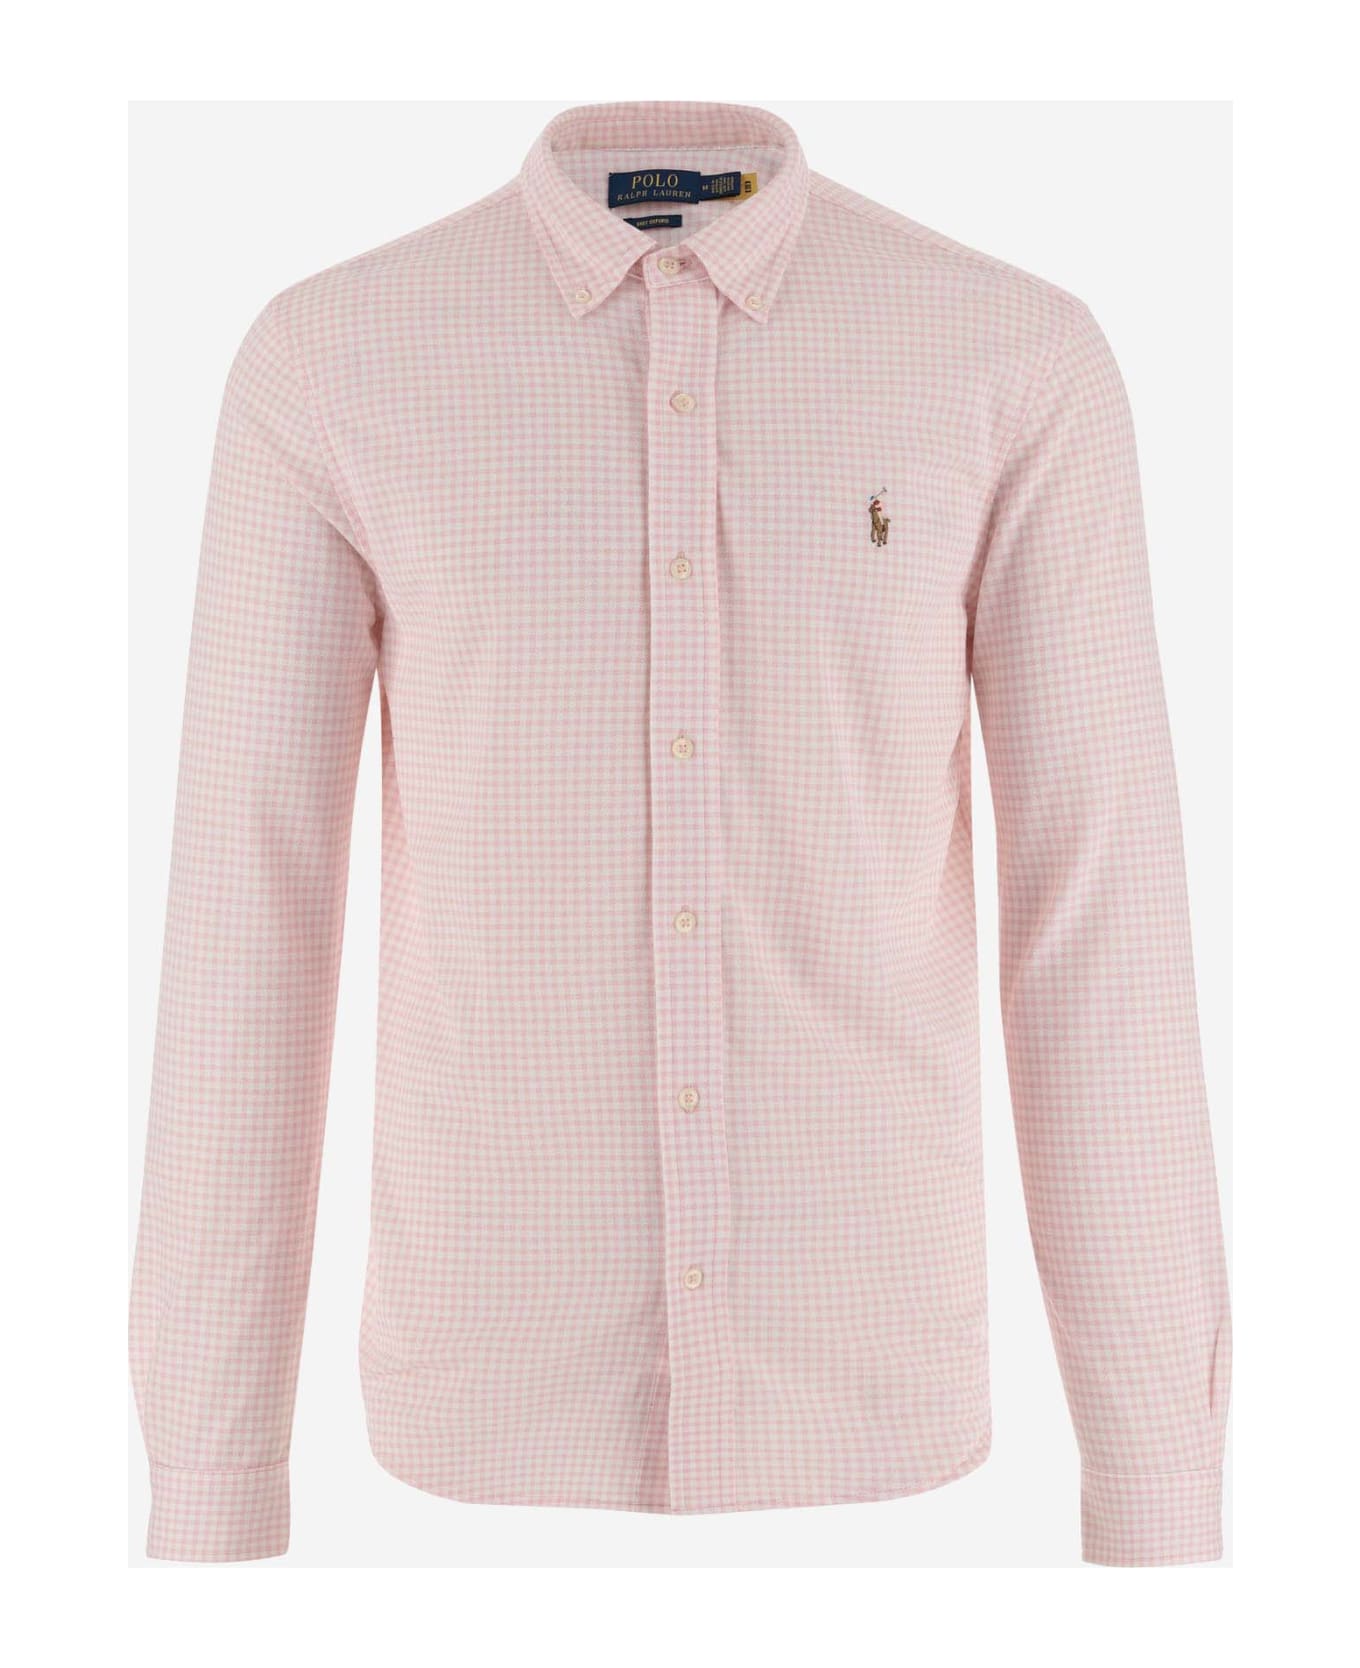 Polo Ralph Lauren Cotton Shirt With Check Pattern - Pink